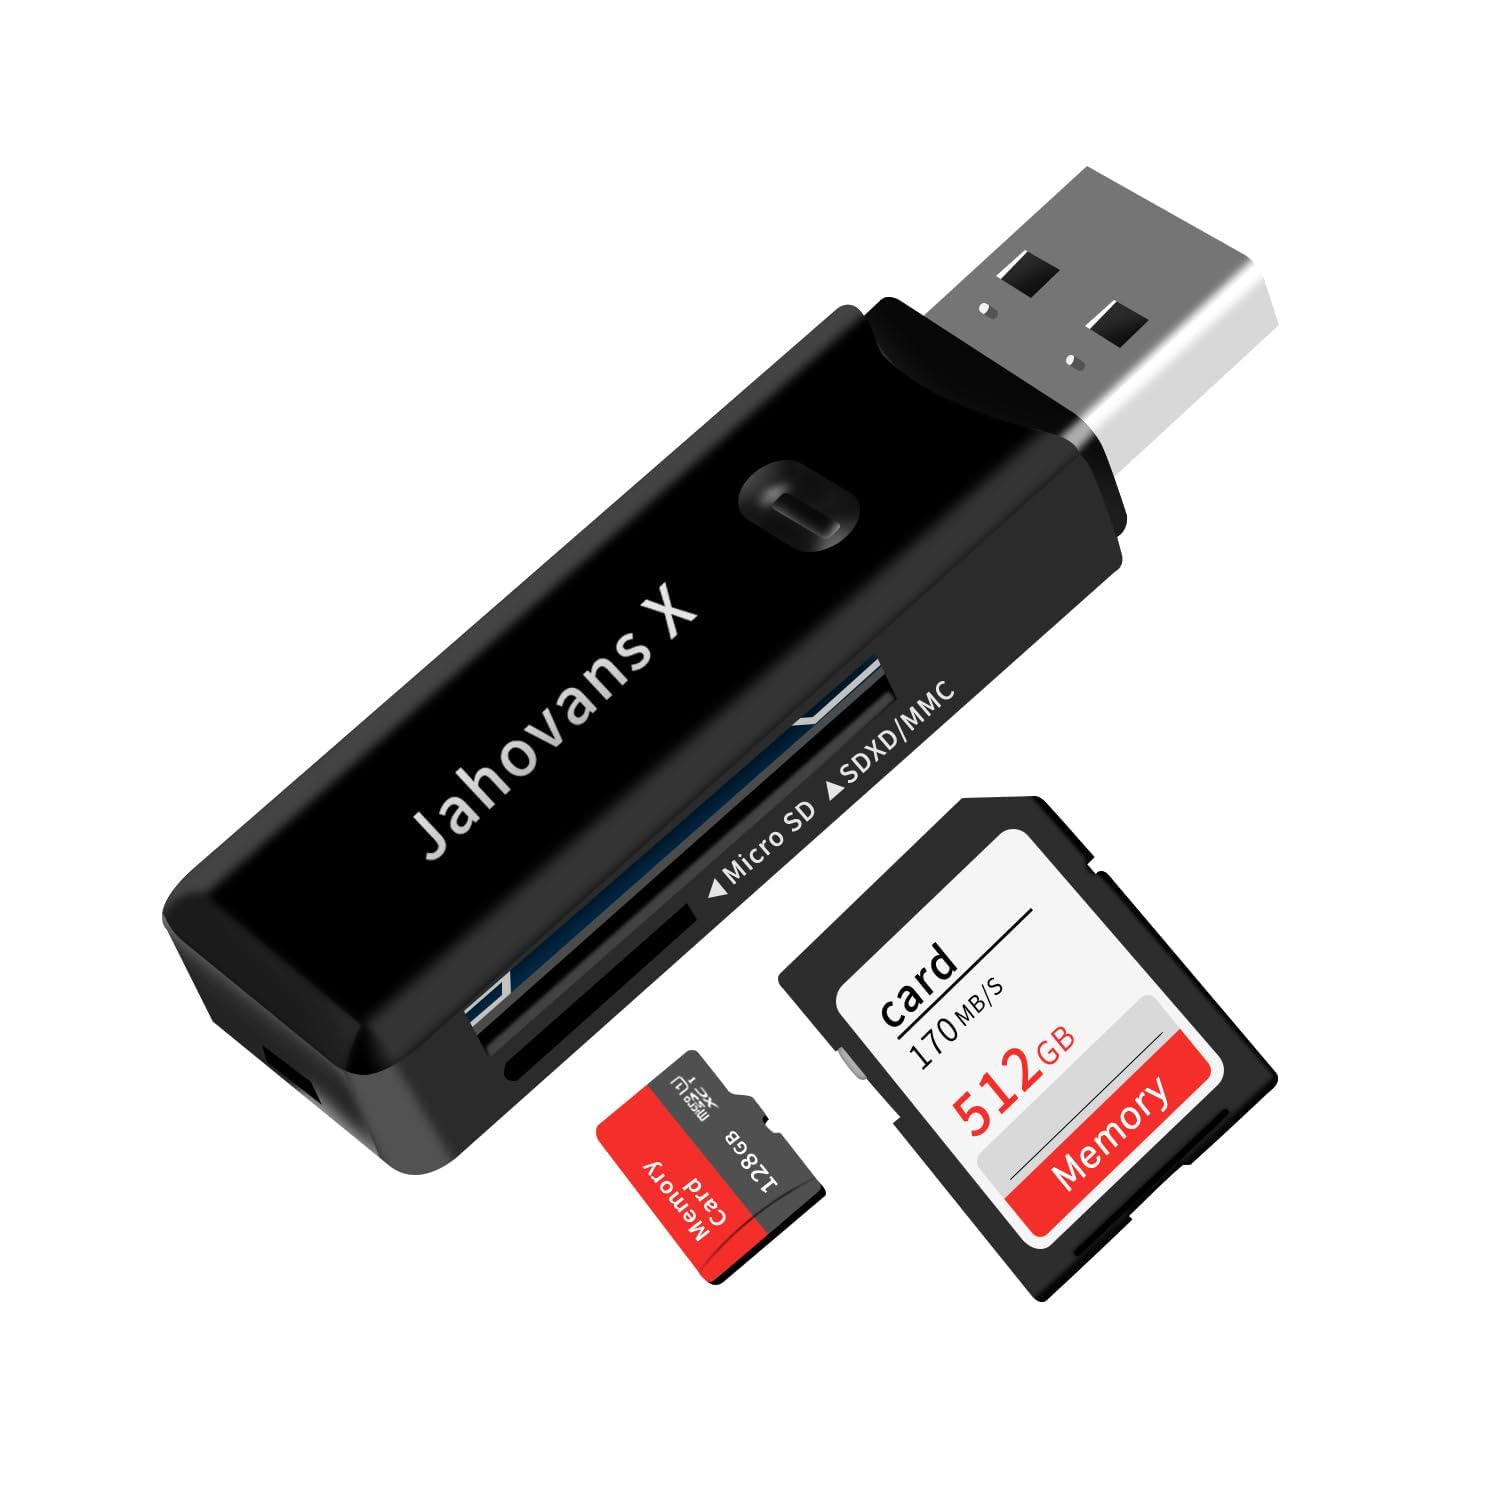 1. USB Card Reader: Use a USB card reader to connect your SD card to your computer.
2. Built-in SD Card Slot: If your computer has a built-in SD card slot, insert the SD card directly into it.